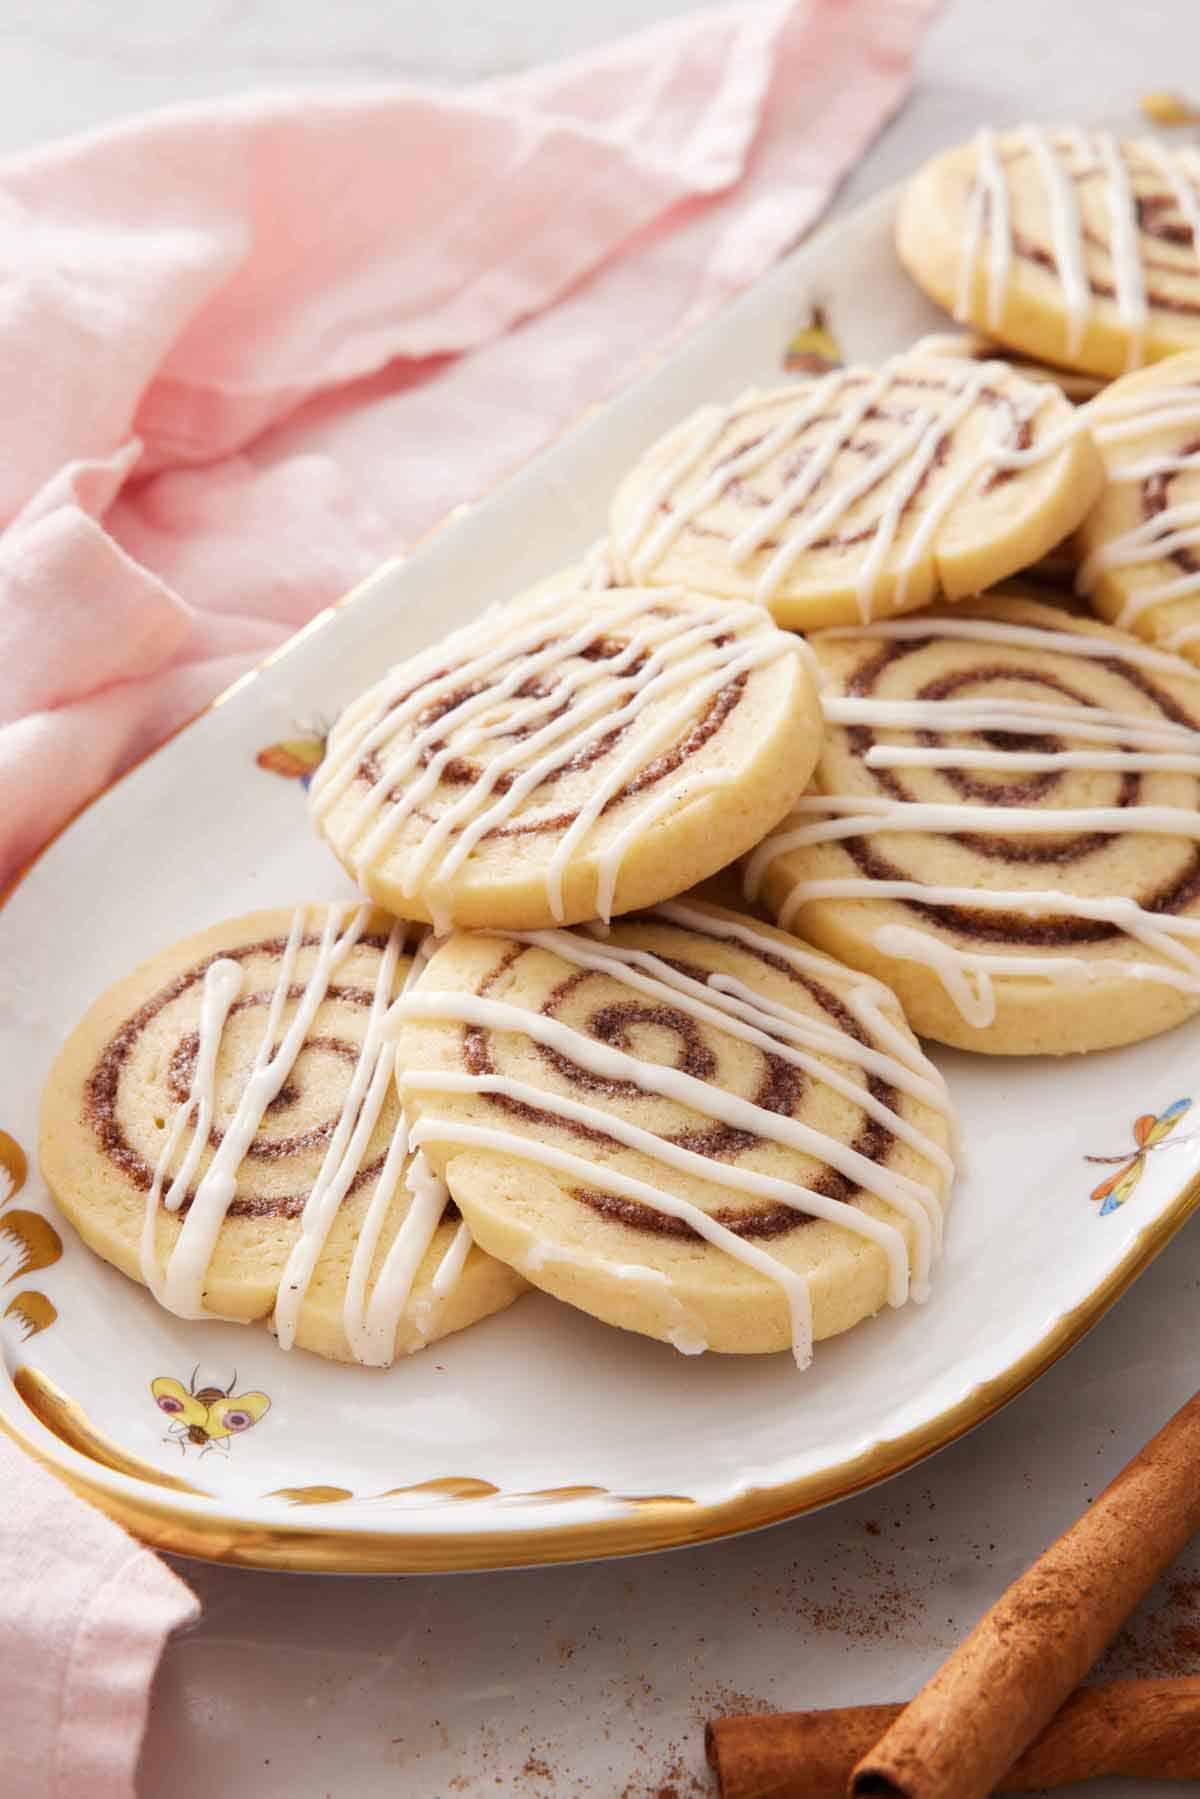 A platter of cinnamon roll cookies with icing drizzled on top.